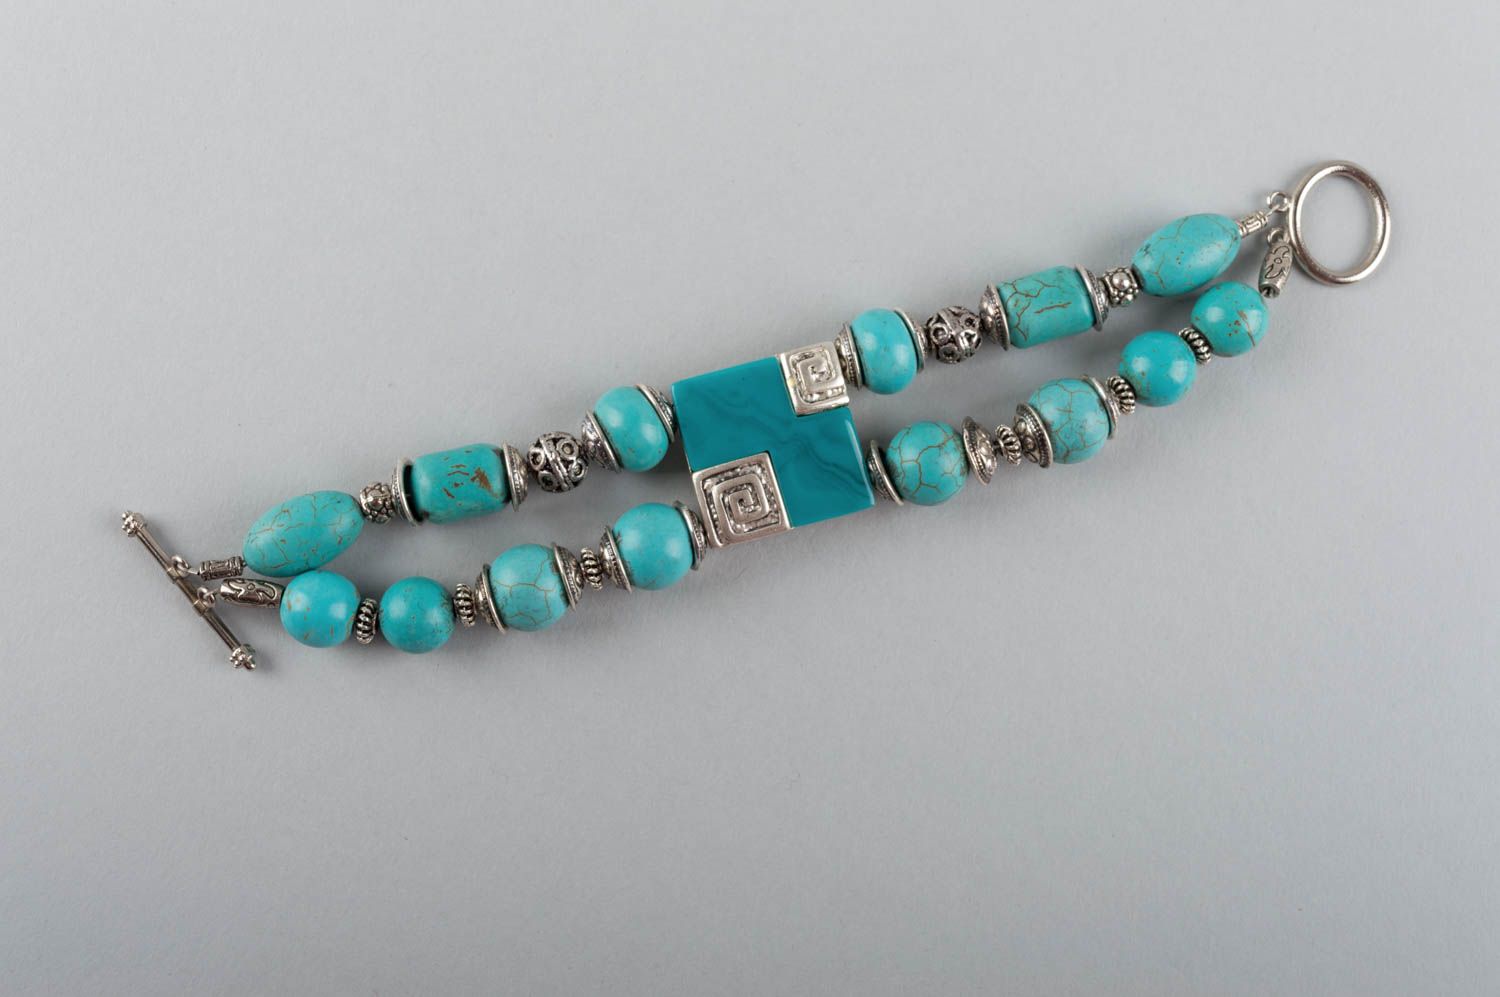 Handmade jewelry made of natural stones bracelet made of turquoise and brass photo 4